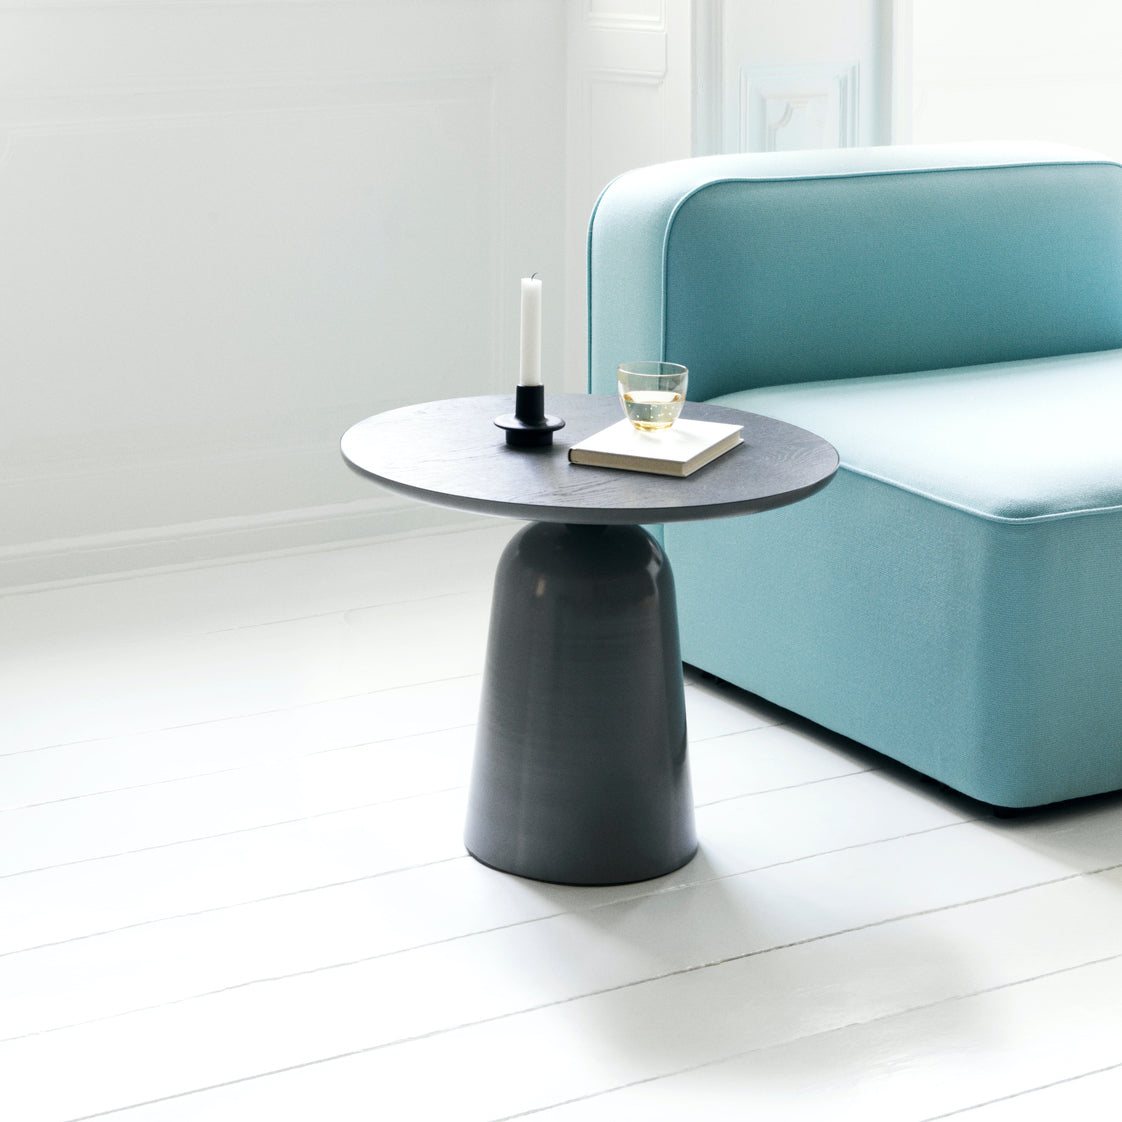 Normann Copenhagen Turn Table at someday designs. #colour_grey